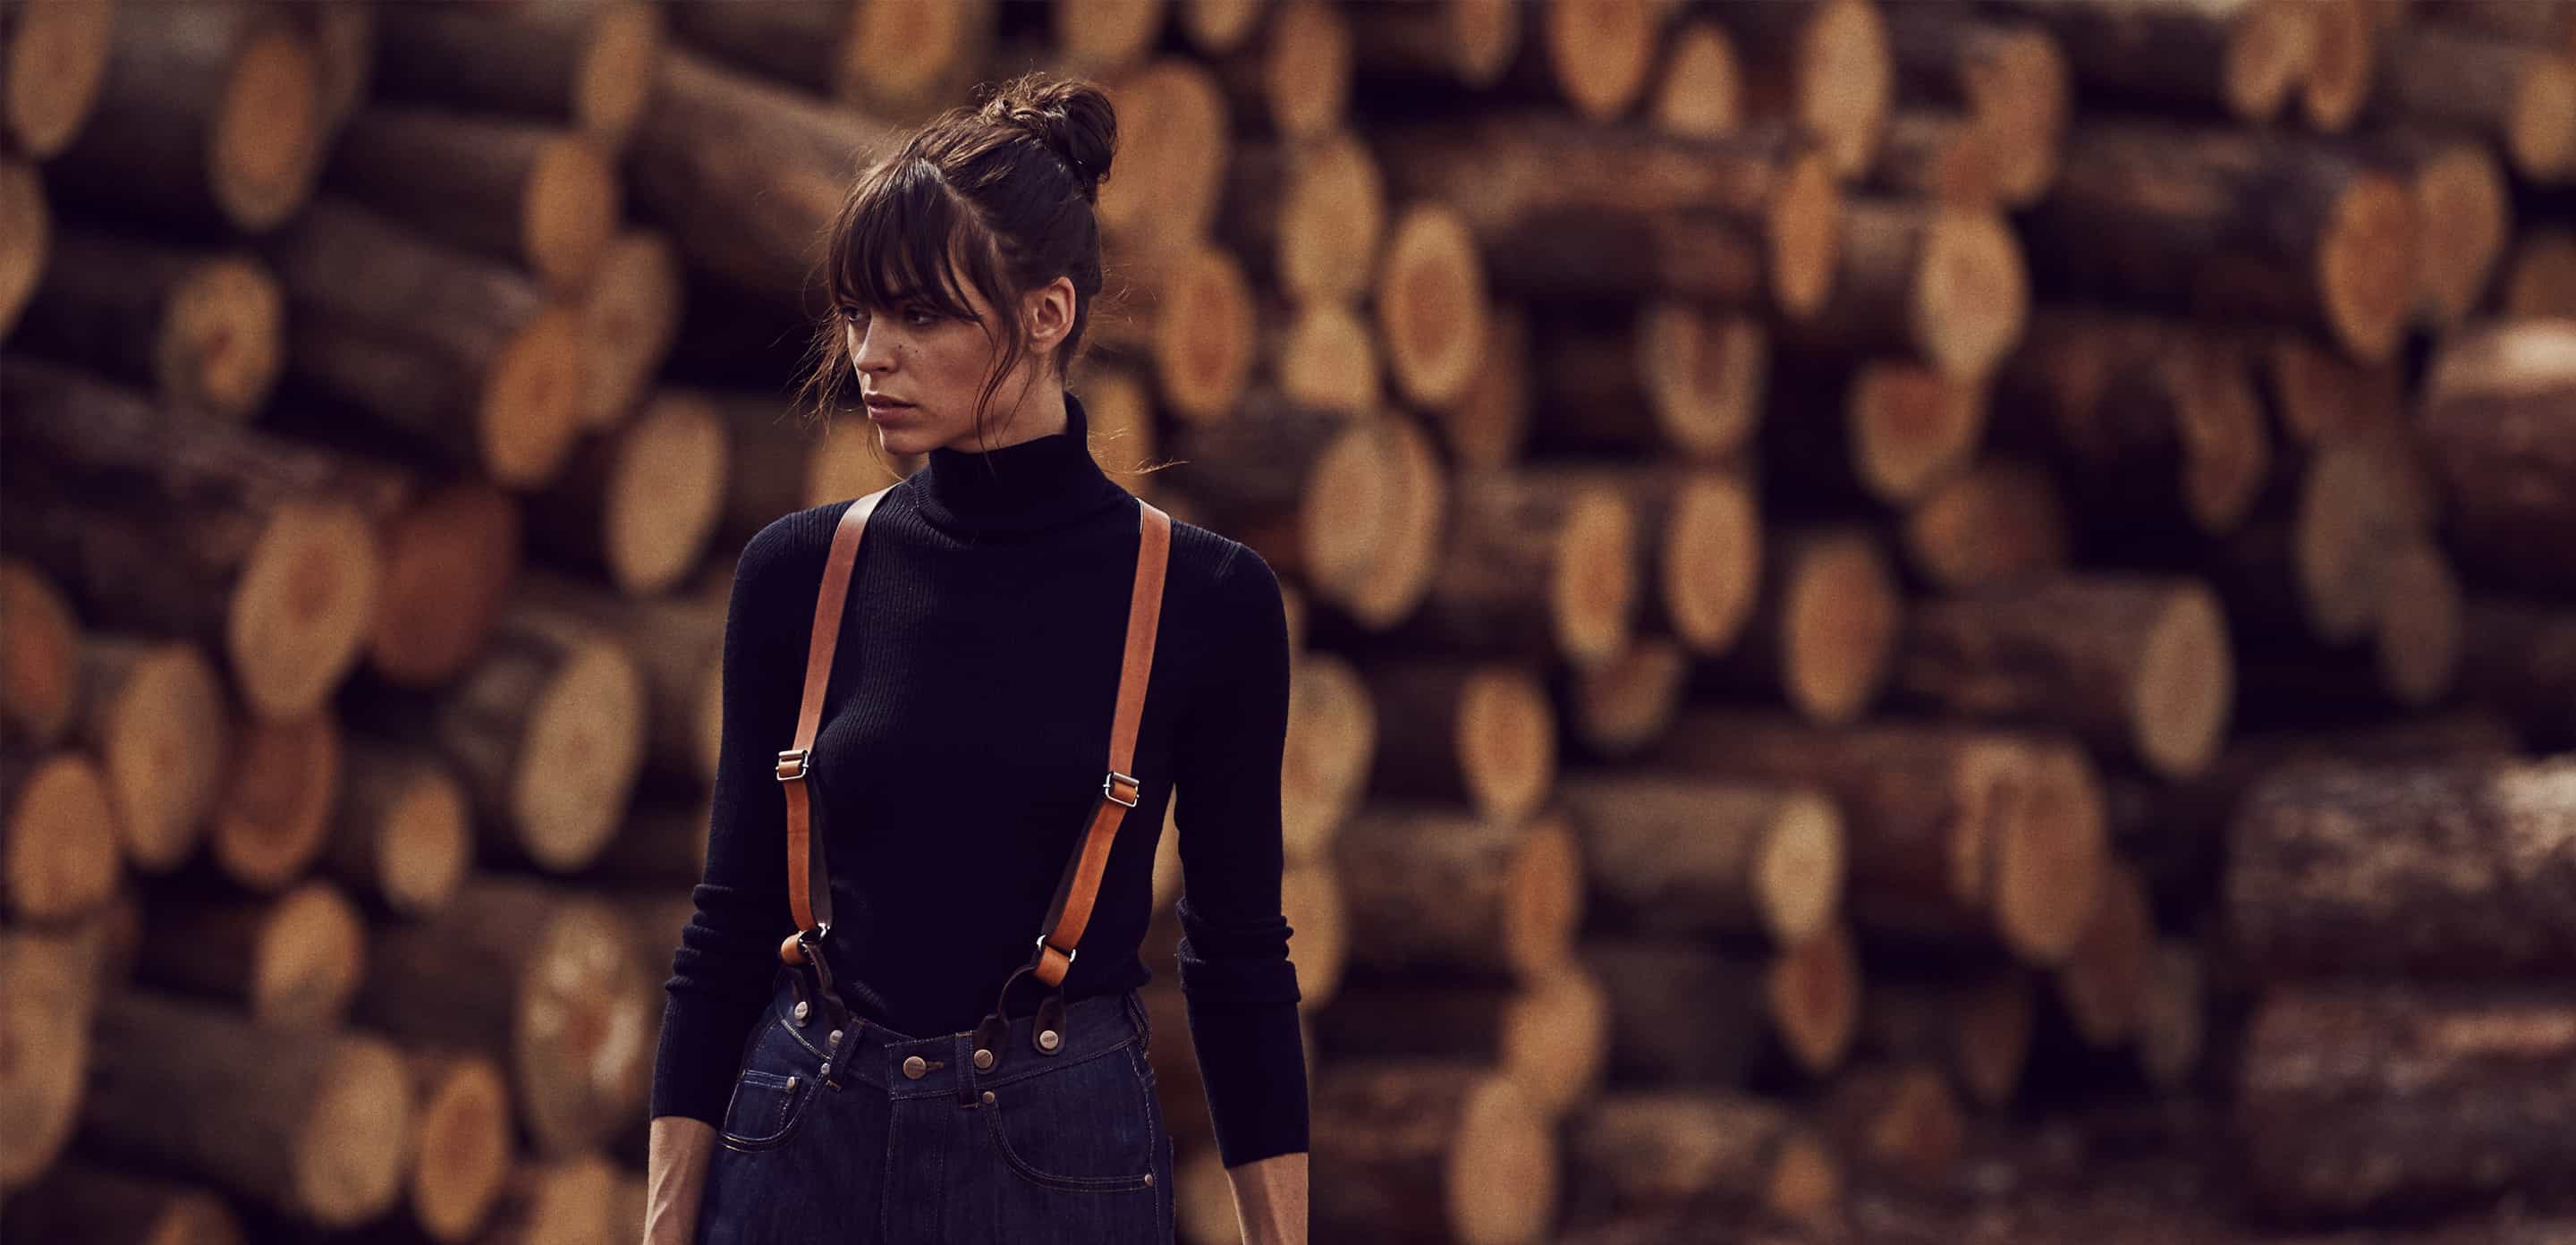 Where To Buy Suspenders For Women